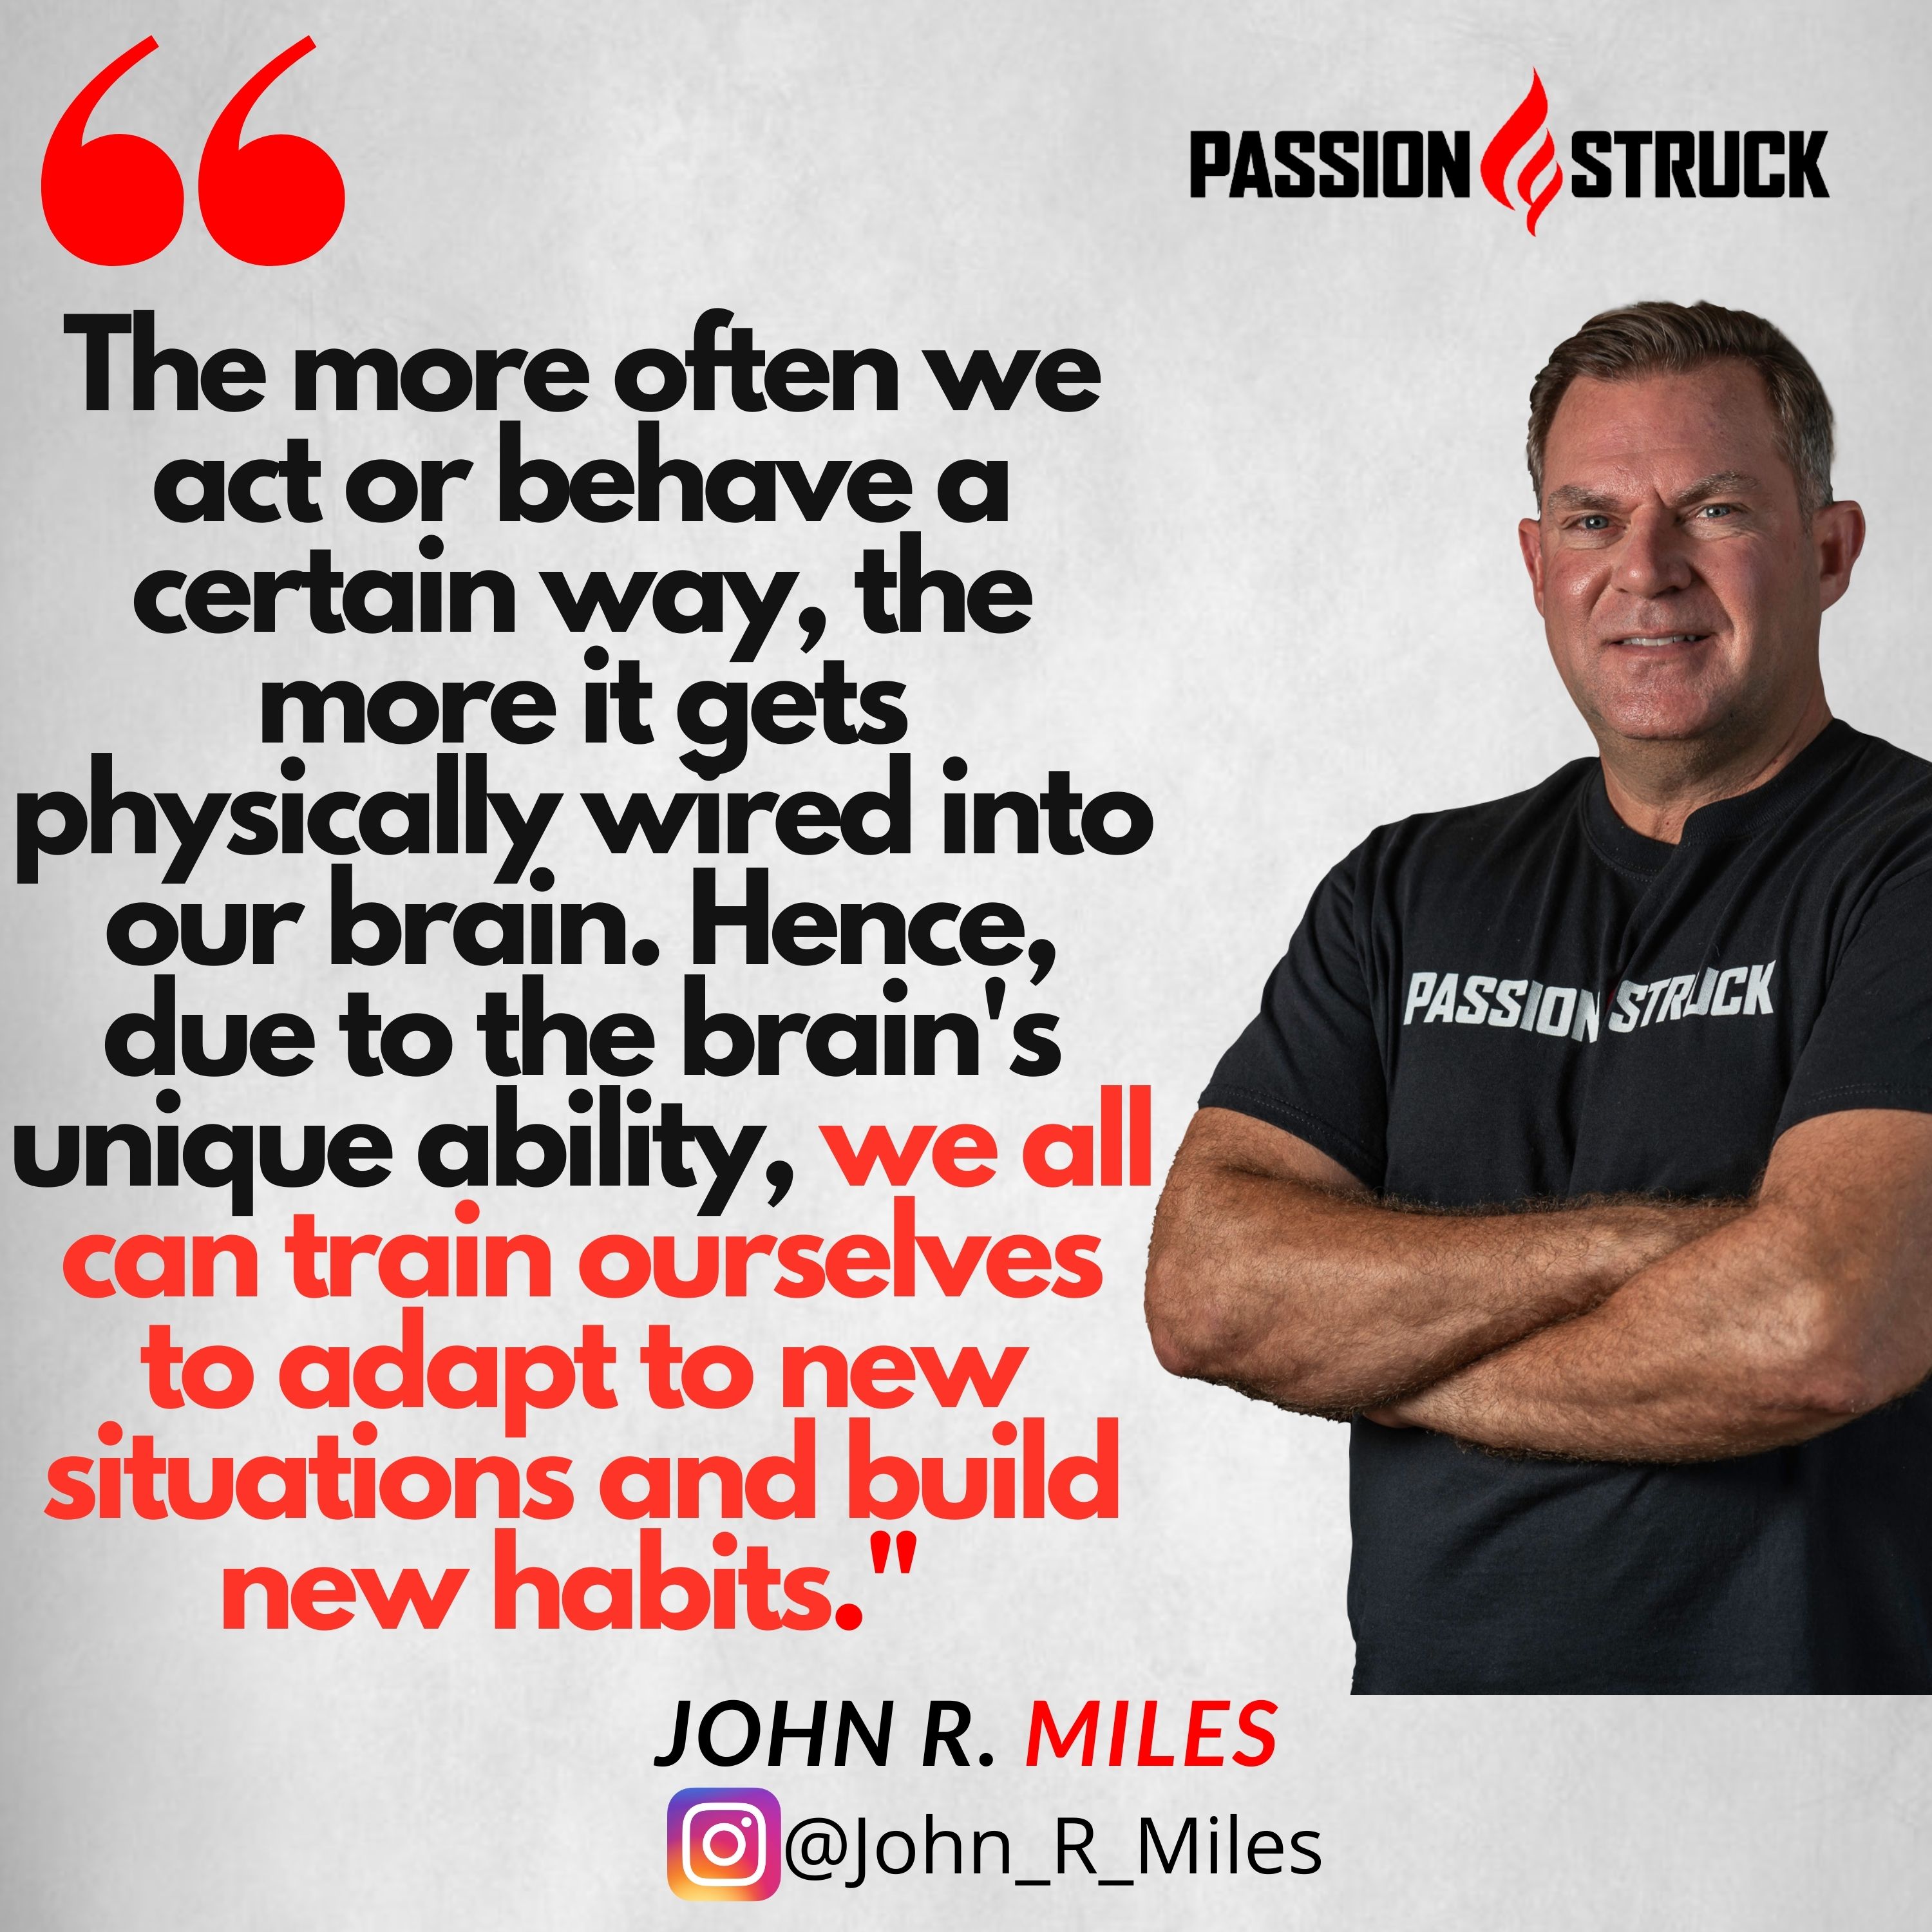 Quote by John R. Miles on healthy habits